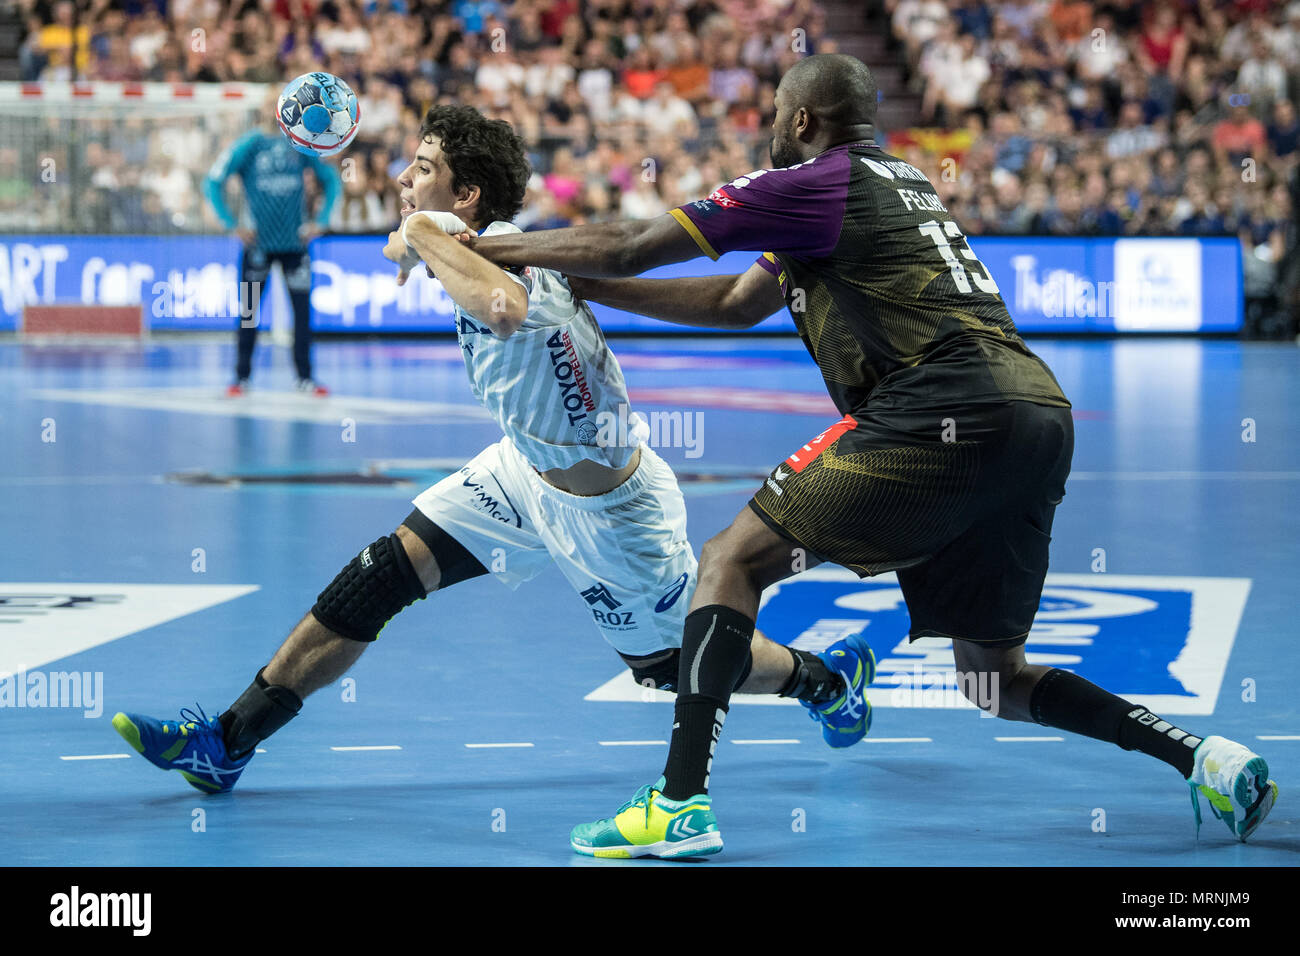 27 May 2018, Germany, Cologne: Handball Champions League final, HBC Nantes vs Montpellier HB at the Lanxess Arena: Rock Feliho (r) of Nantes and Diego Simonet of Montpellier vie for the ball. Photo: Federico Gambarini/dpa Stock Photo